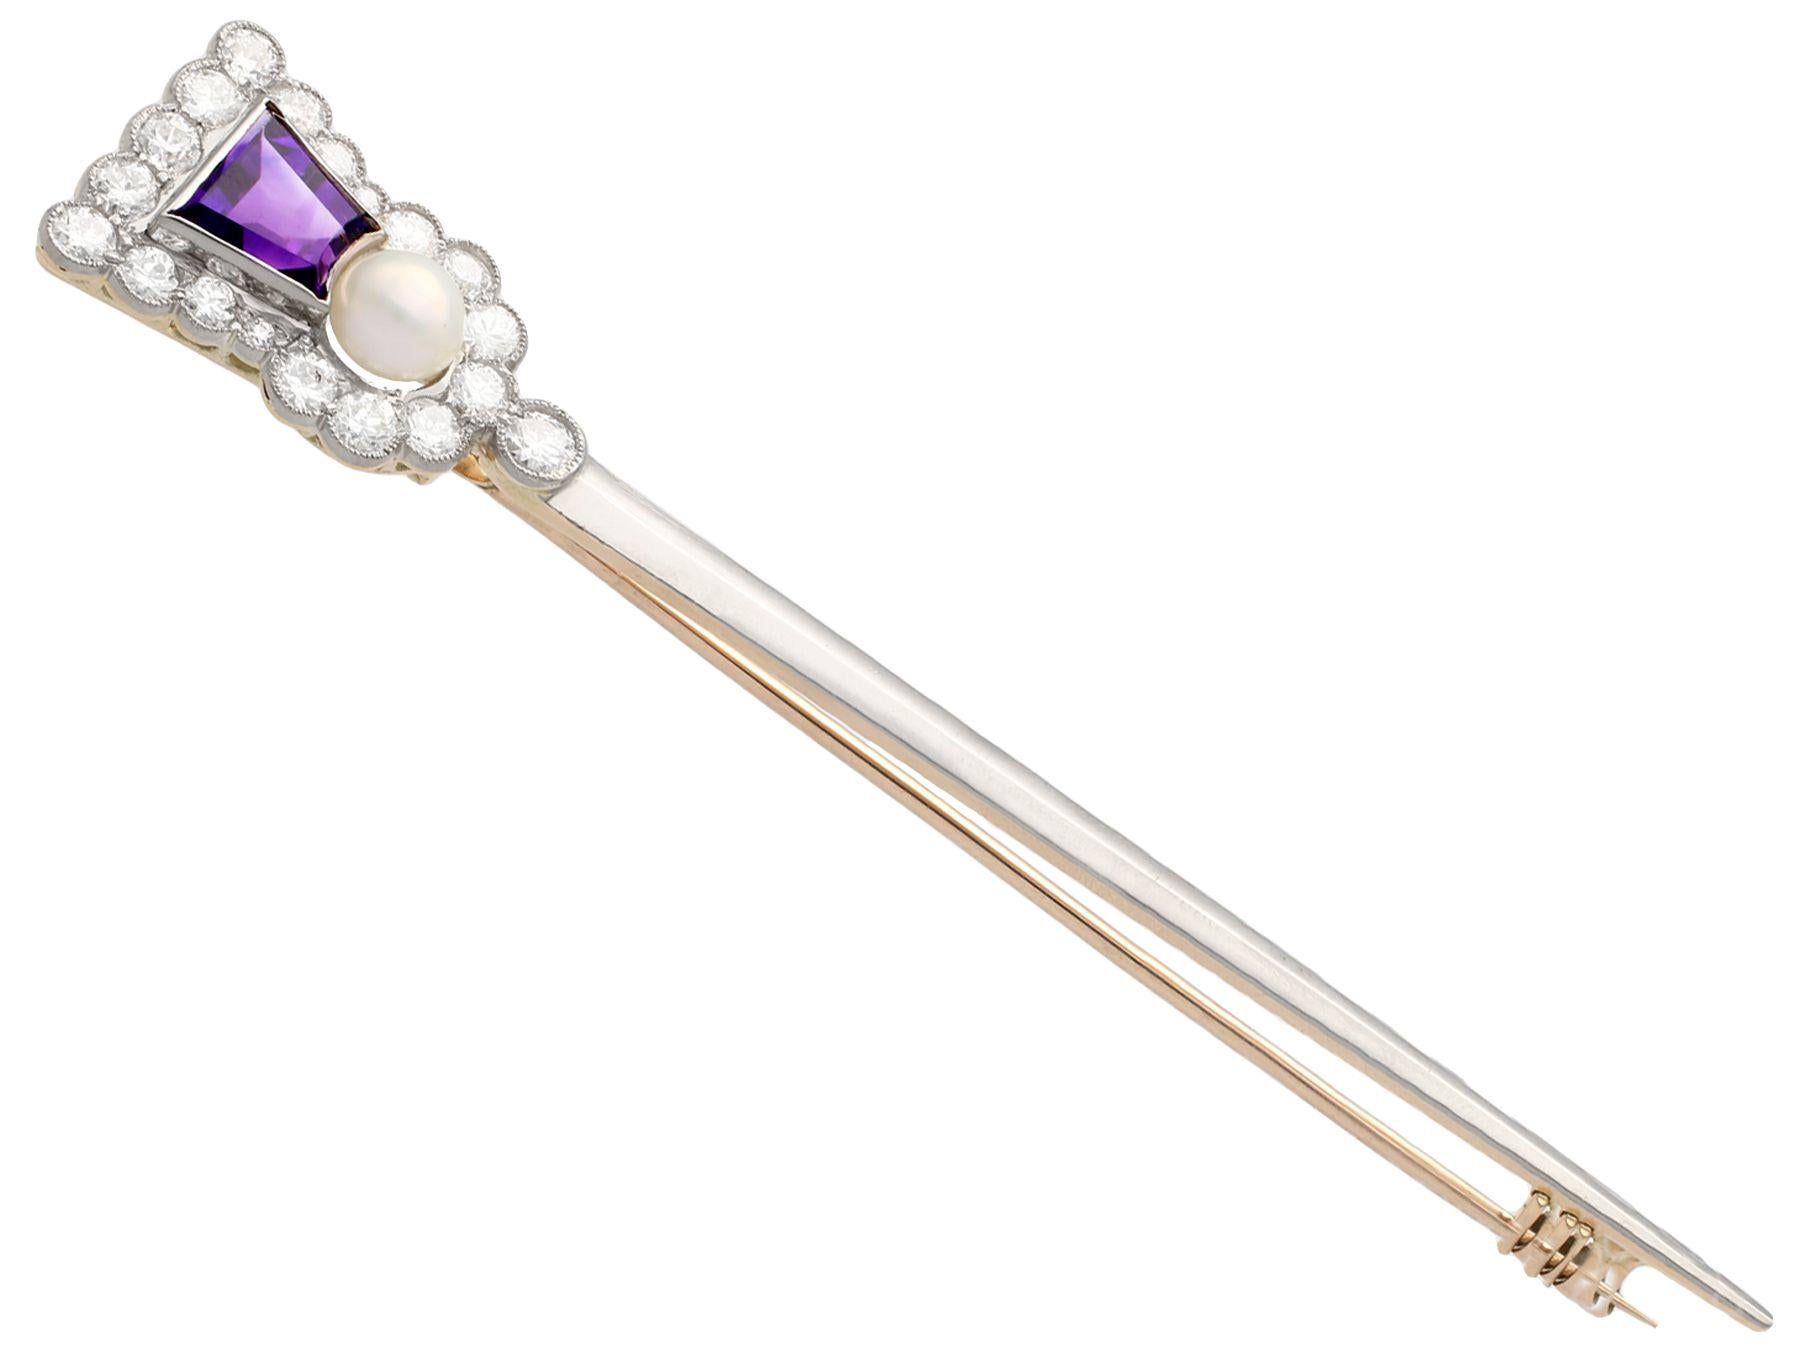 A stunning, fine and impressive 1.71 carat amethyst, 1.90 carat diamond and pearl, 18 karat yellow gold pin brooch in the form of an thistle; part of our diverse antique jewelry and estate jewelry collections.

This stunning, fine and impressive